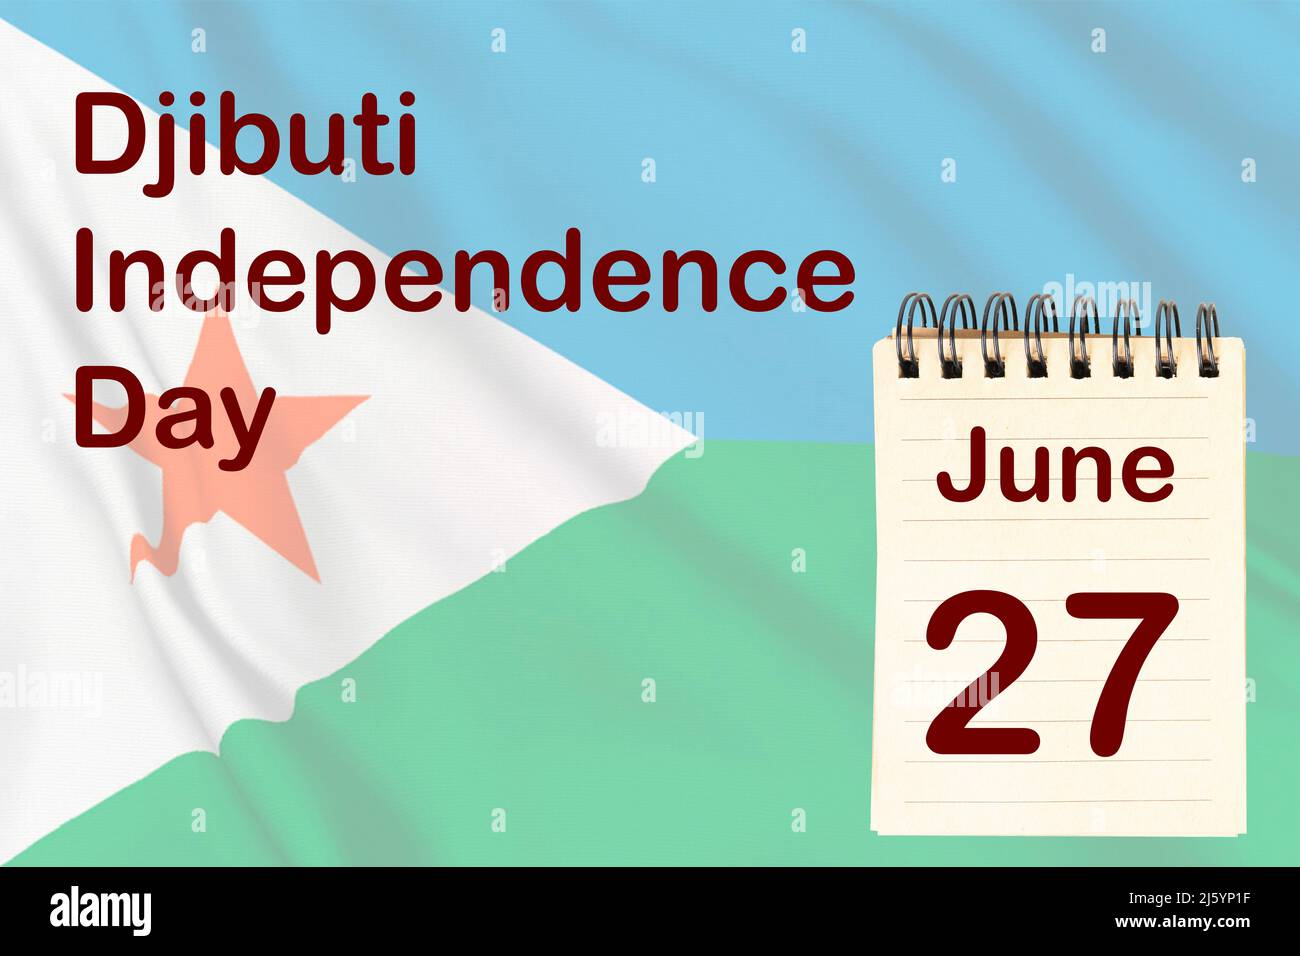 The celebration of the Djibuti Independence Day with the flag and the calendar indicating the June 27 Stock Photo